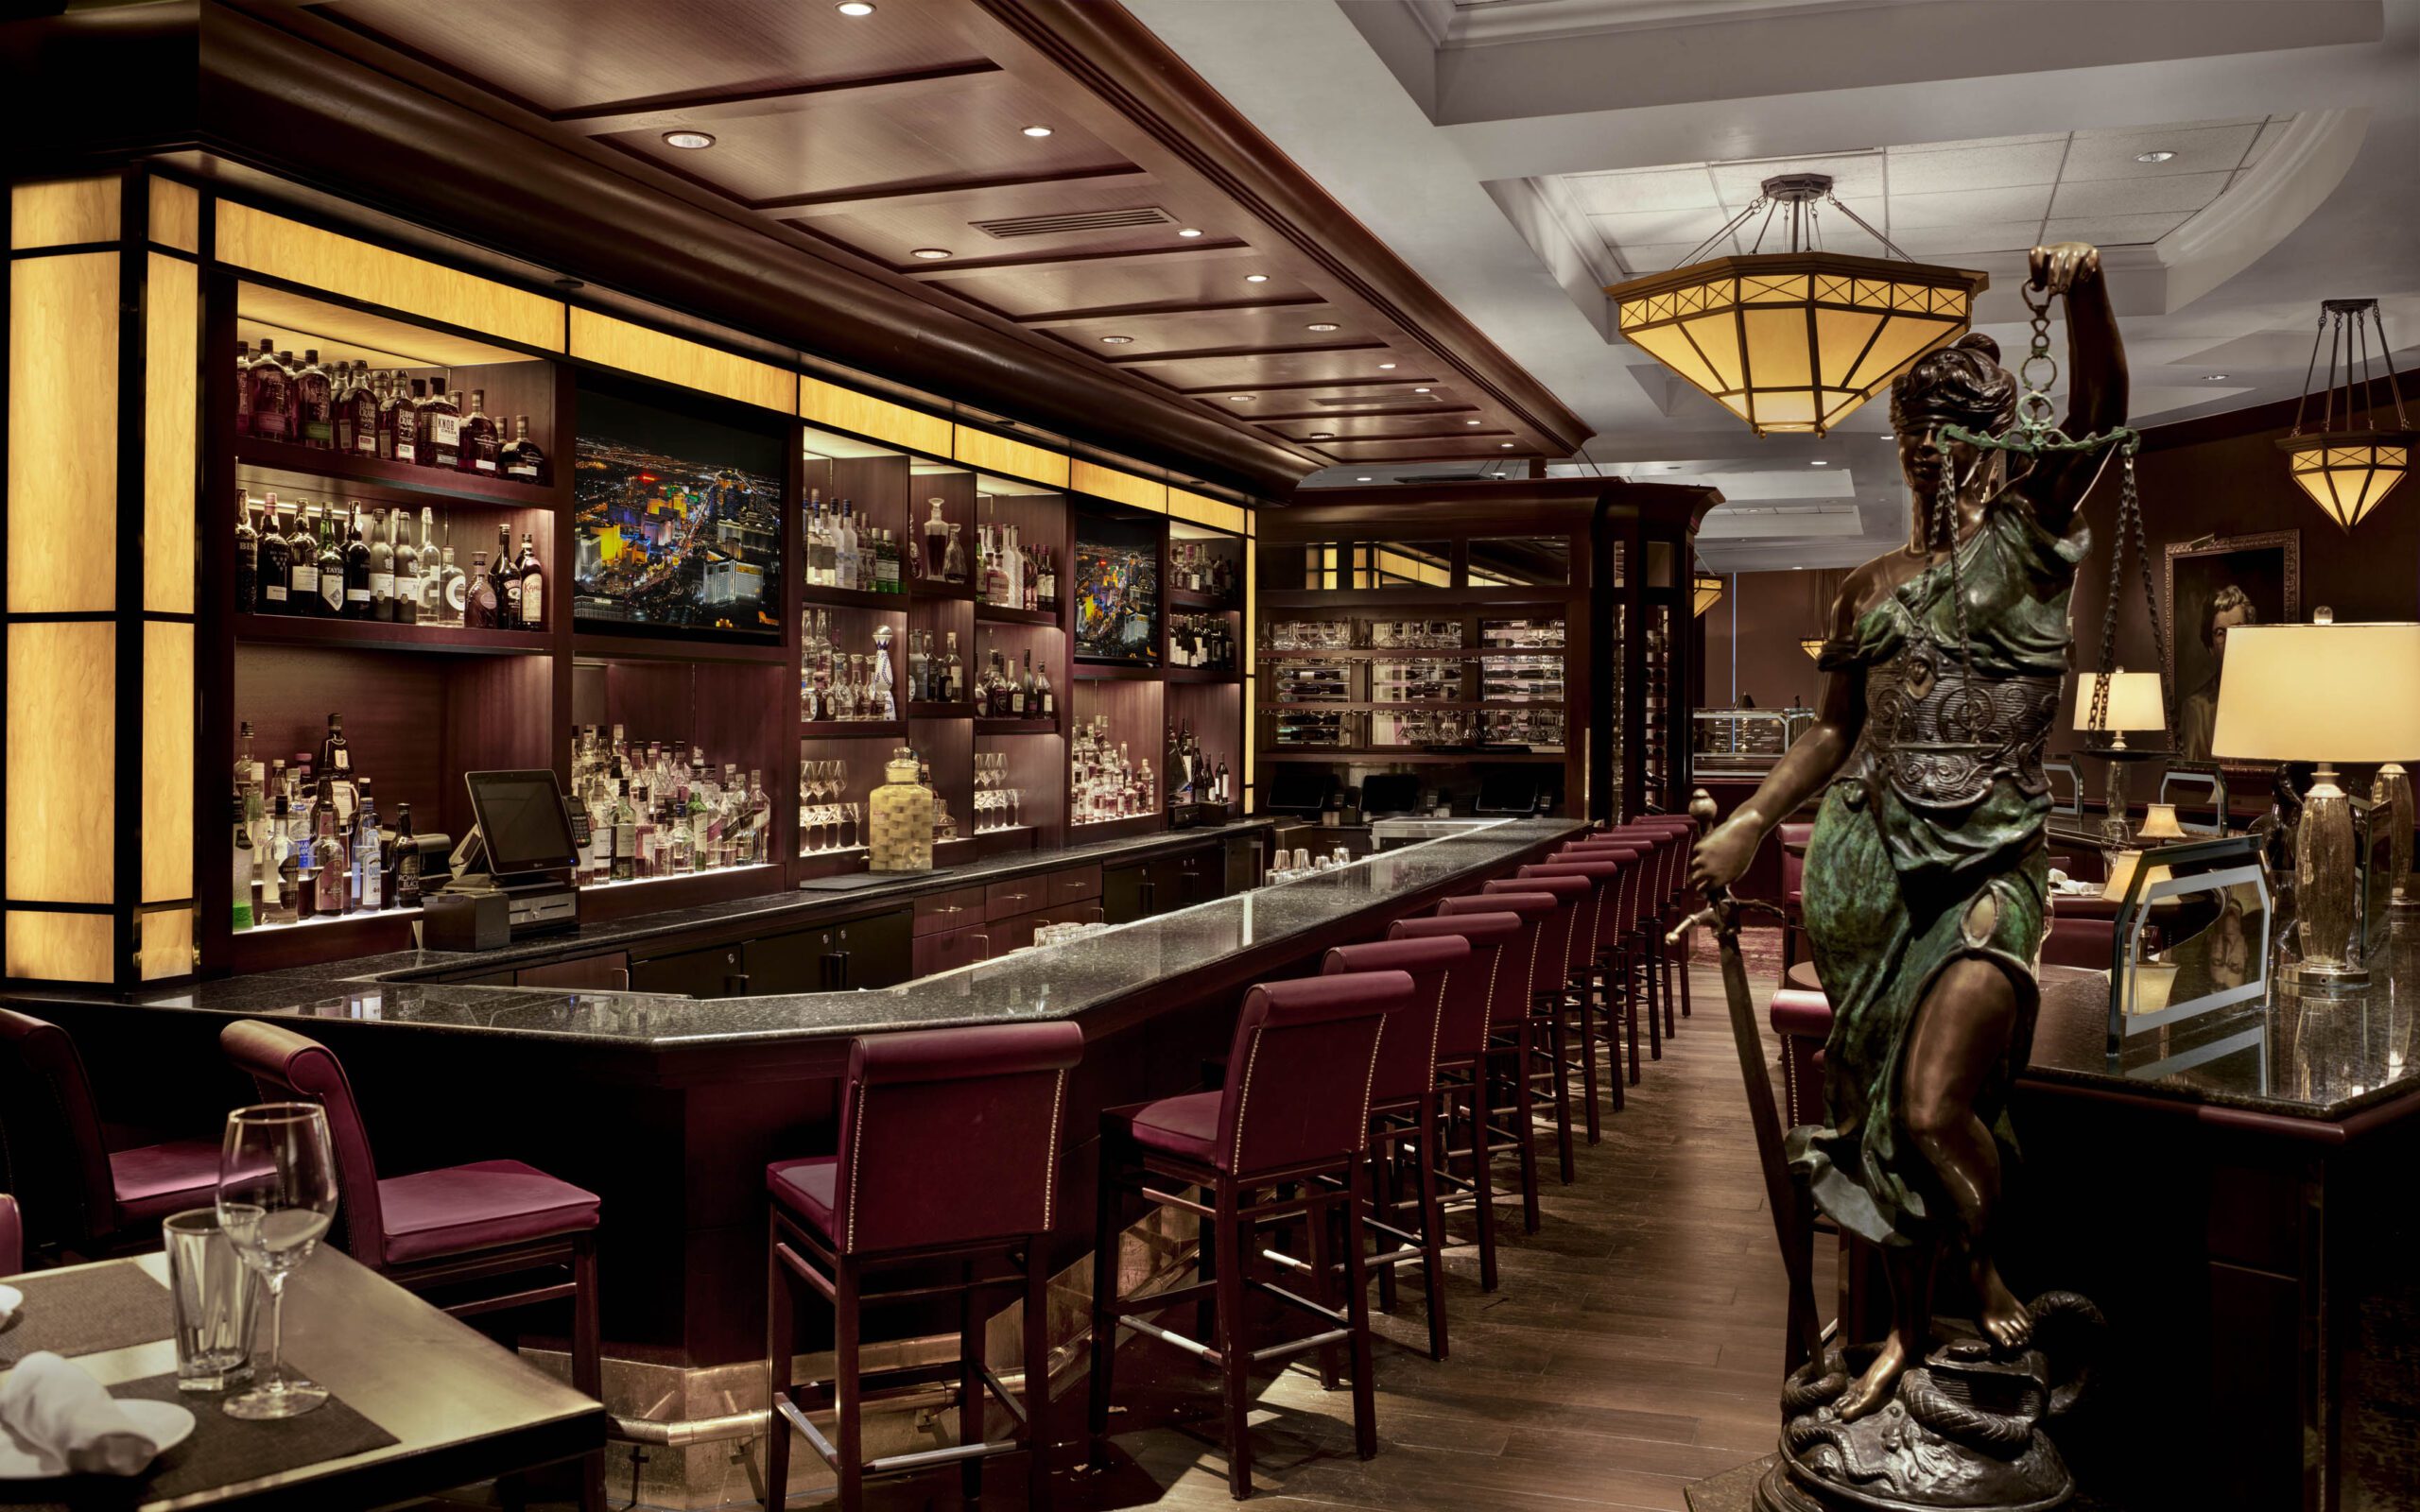 Bar at The Capital Grille